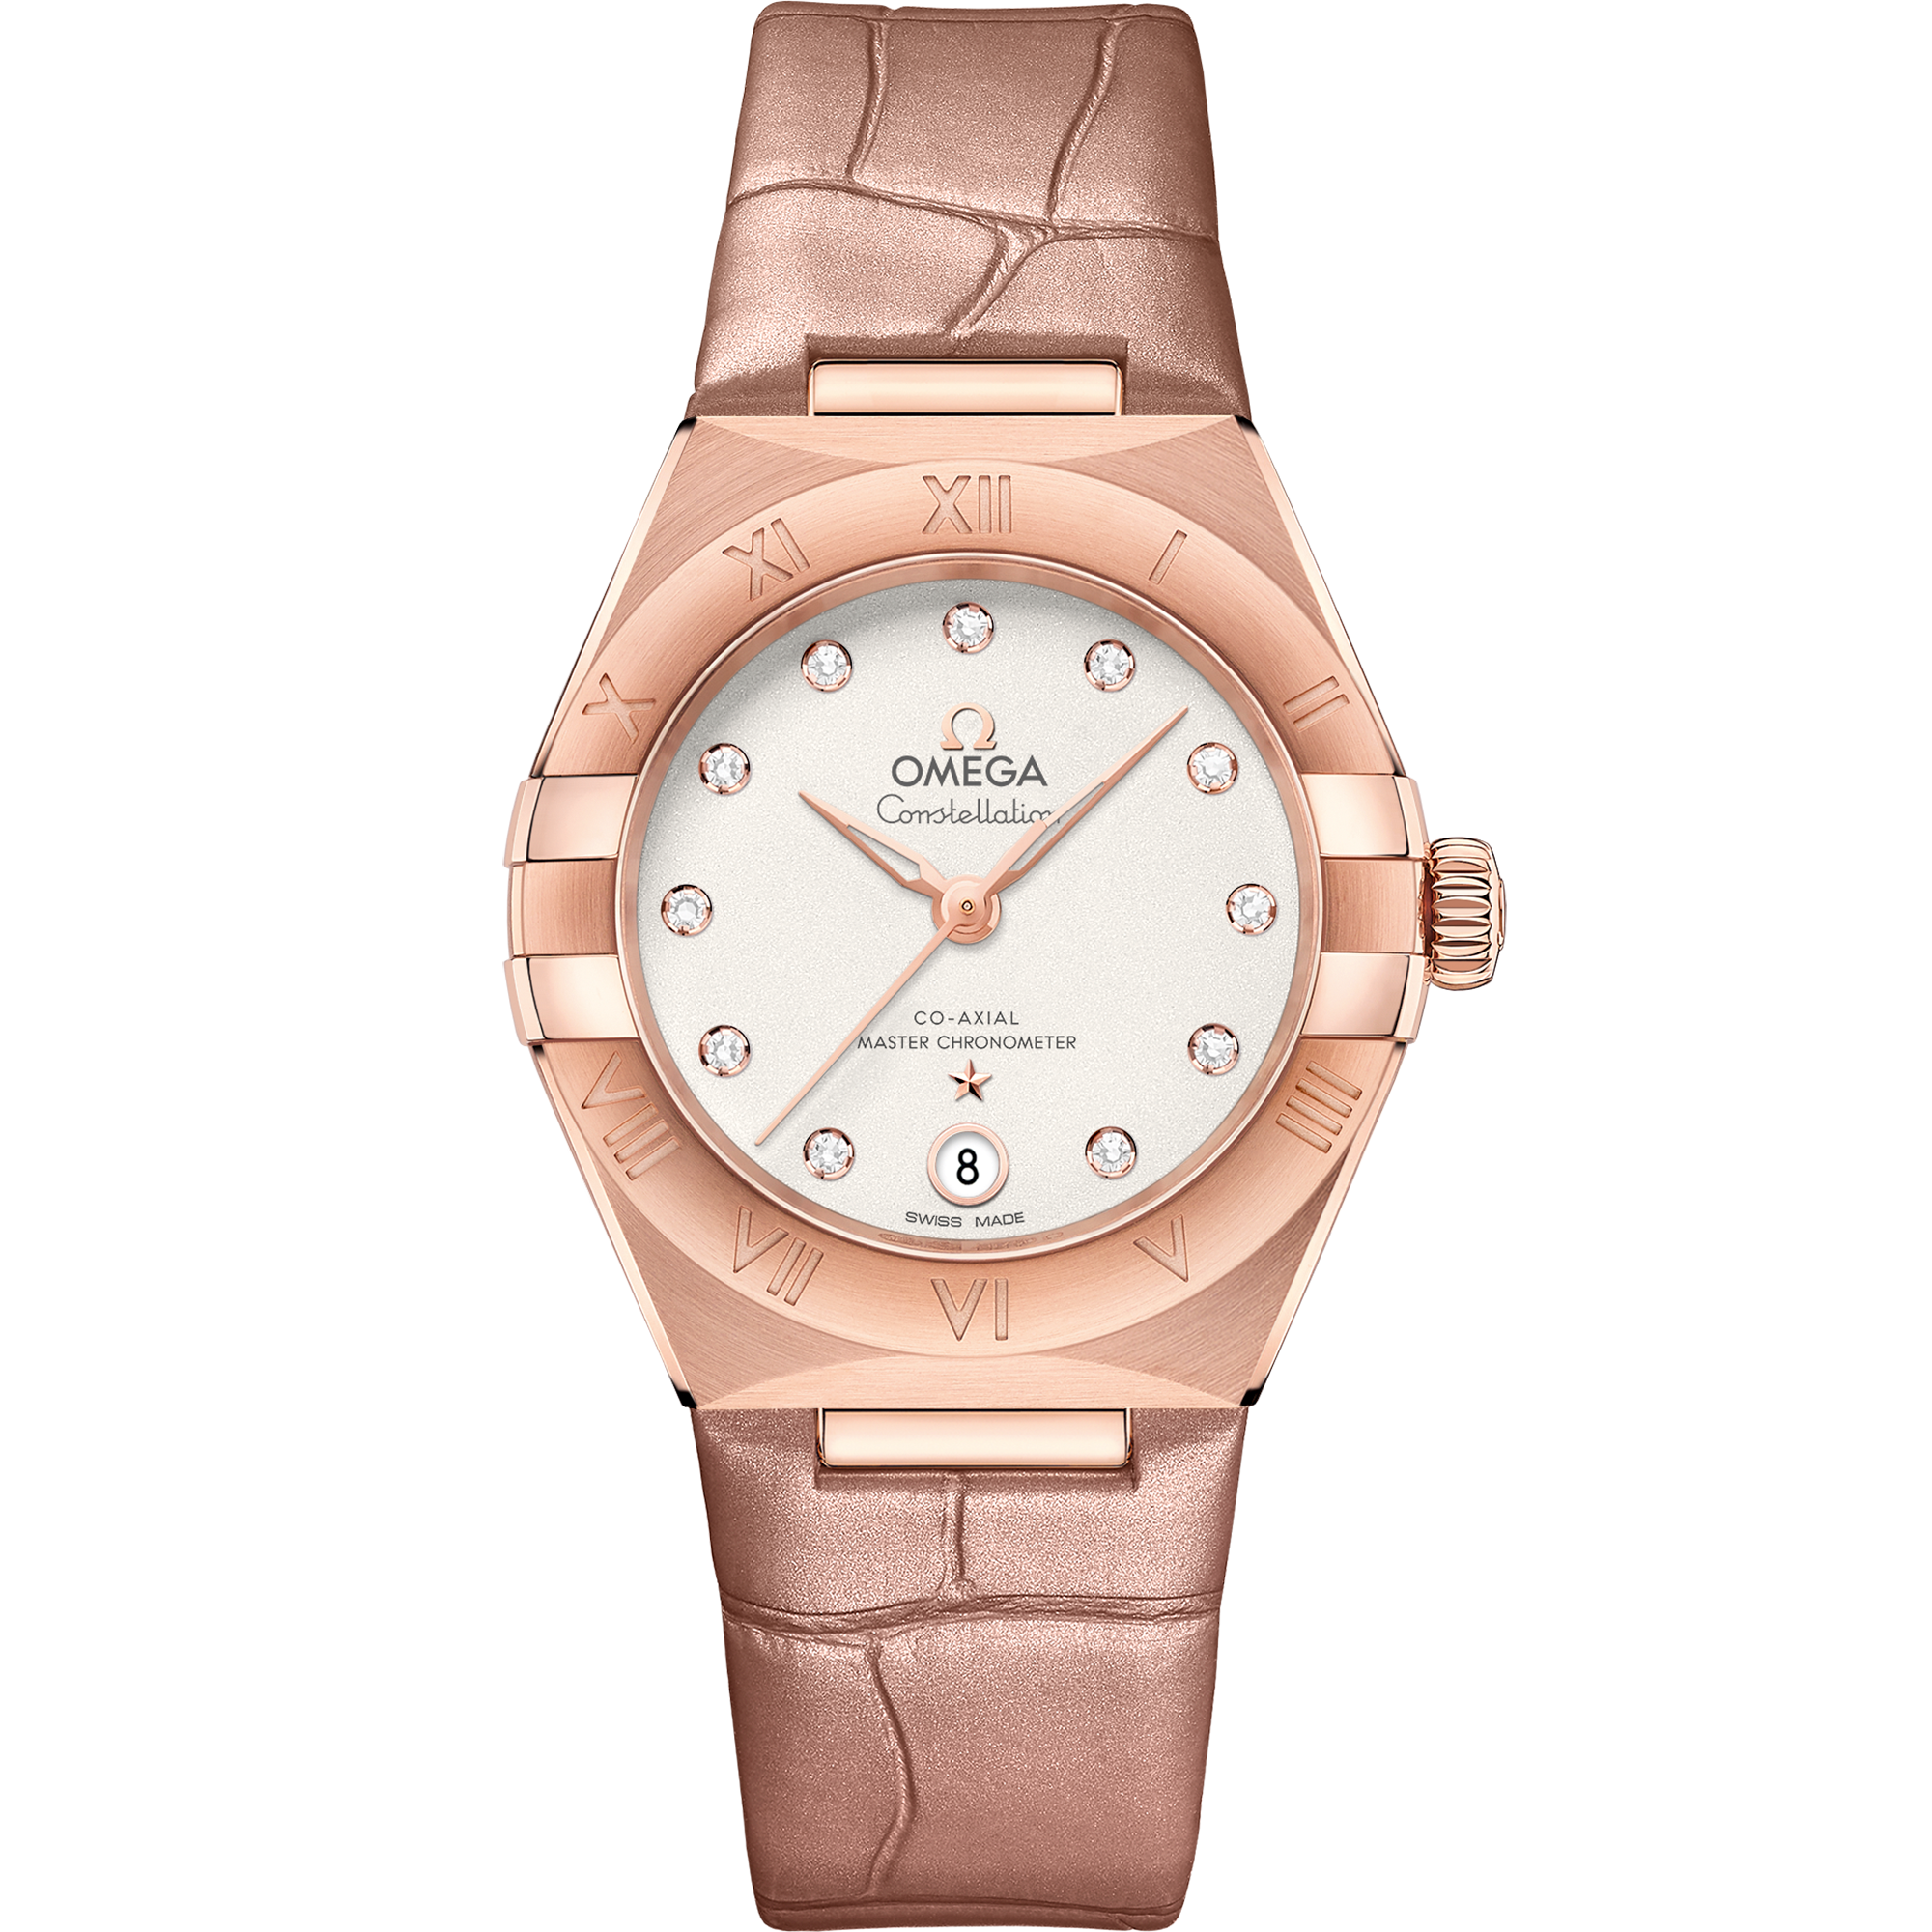 Constellation 29 mm, Sedna™ gold on leather strap - 131.53.29.20.52.002